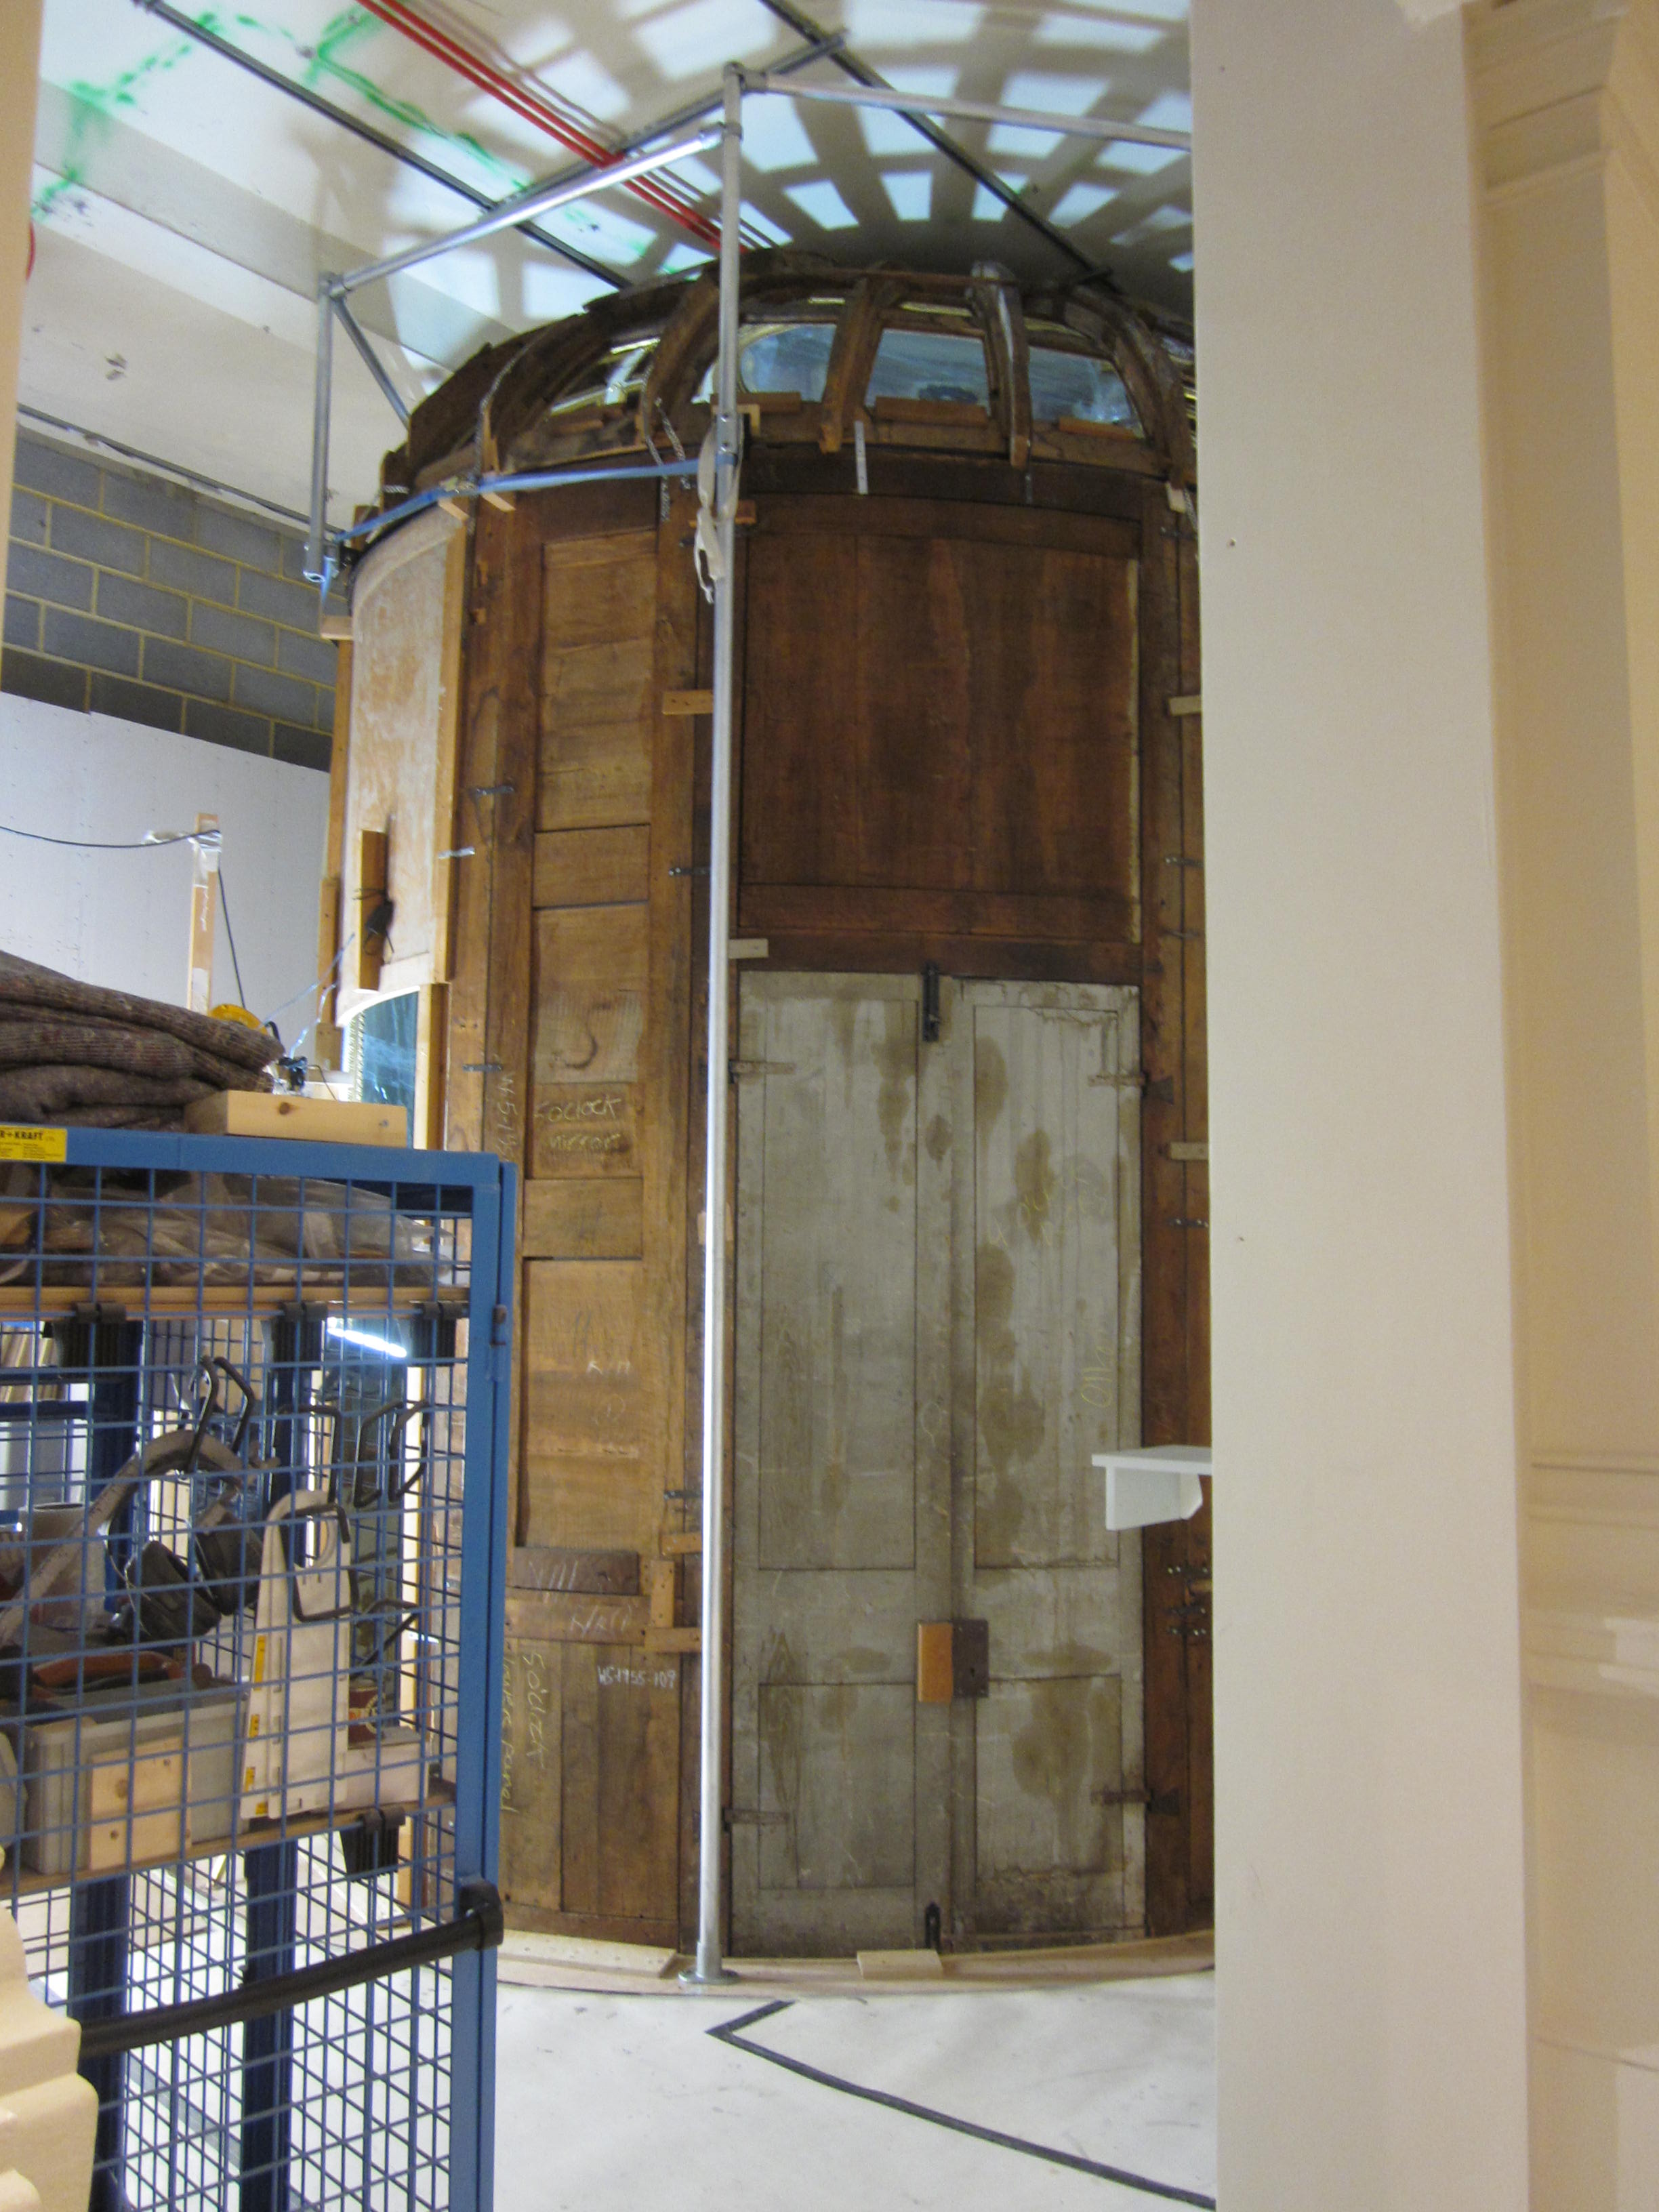 The Italian mirrored cabinet, during construction